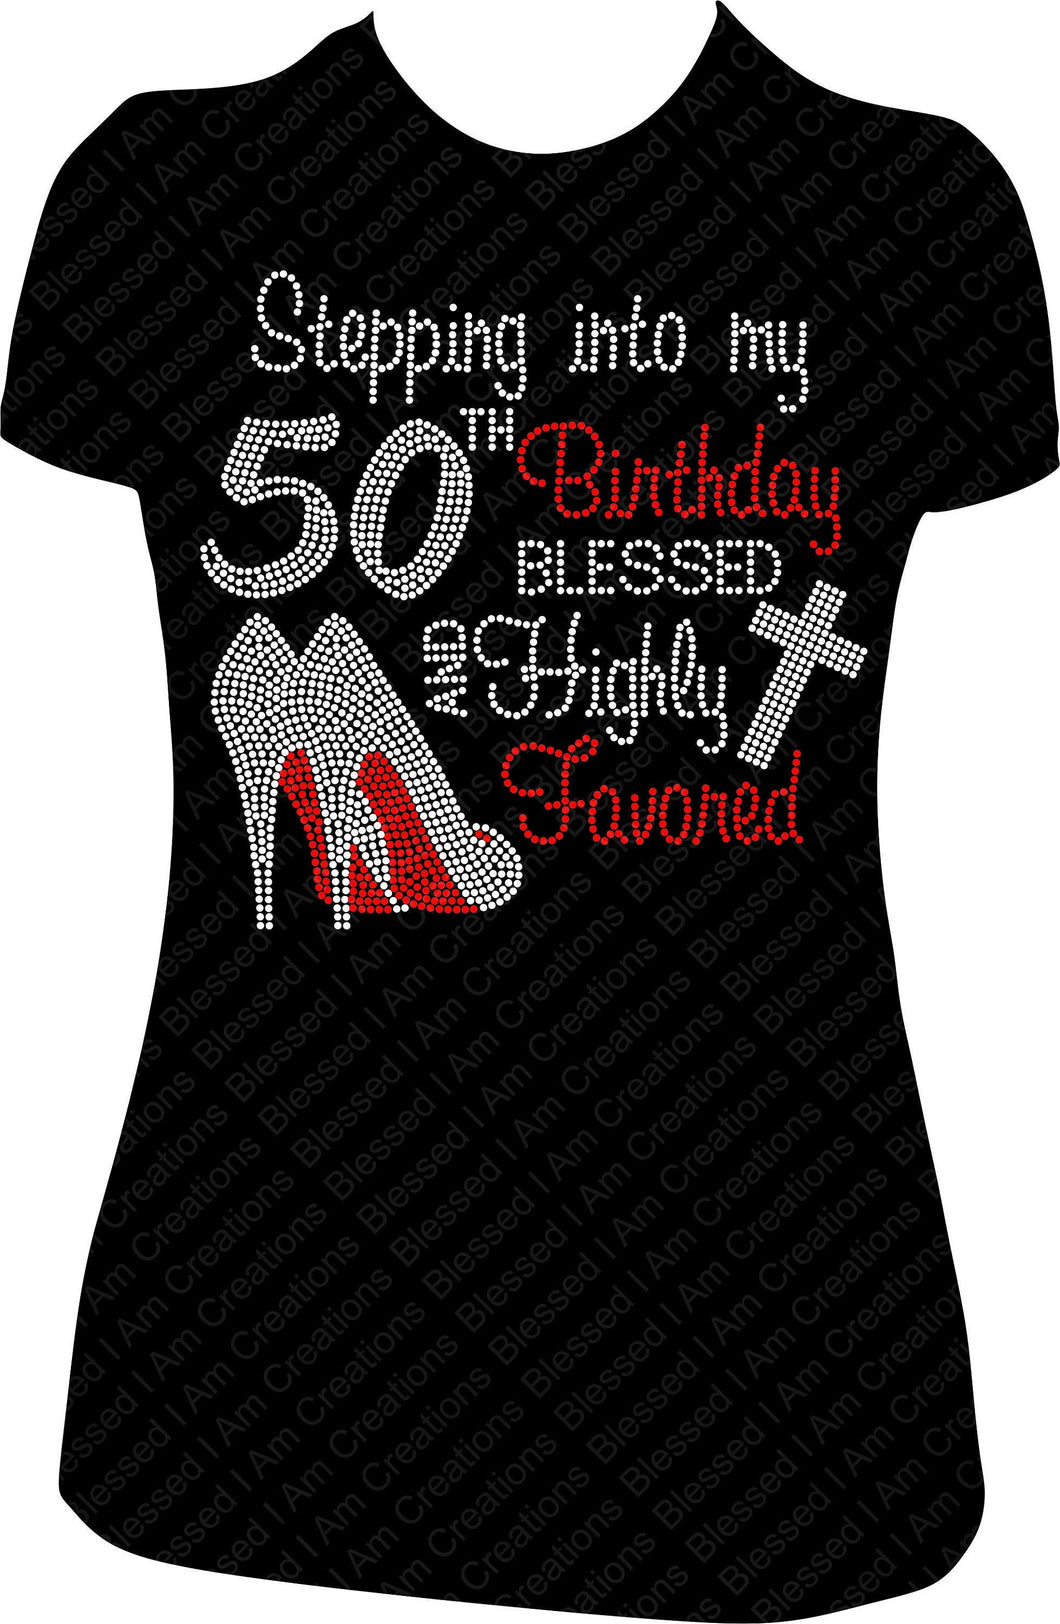 Stepping into my 50th Birthday Blessed and Highly Favored Rhinestone Birthday Shirt